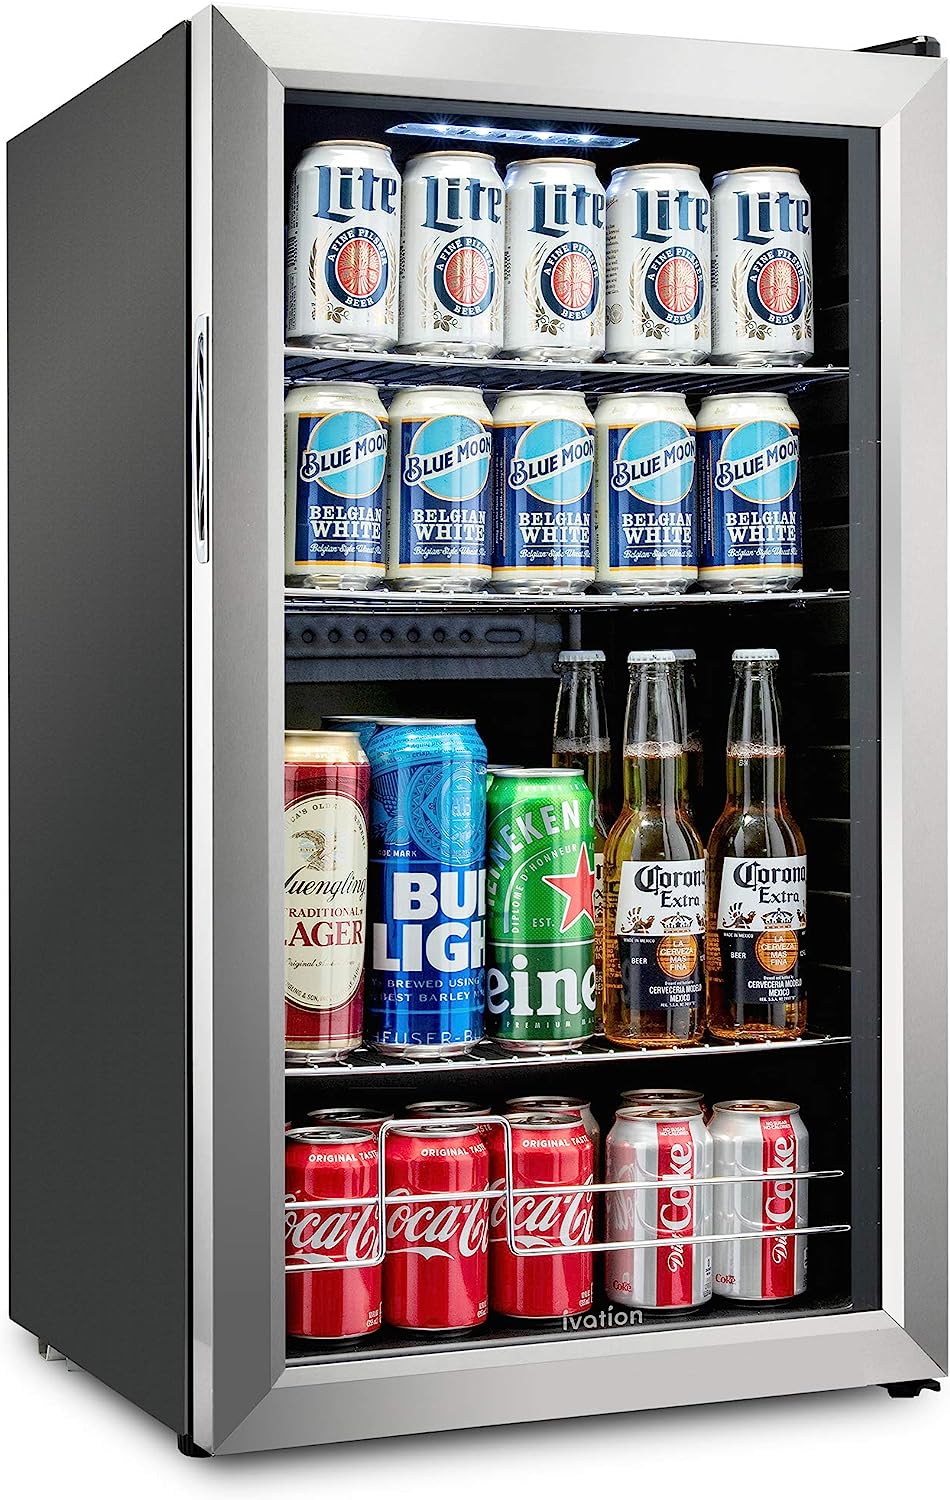 A refrigerator with drinks inside